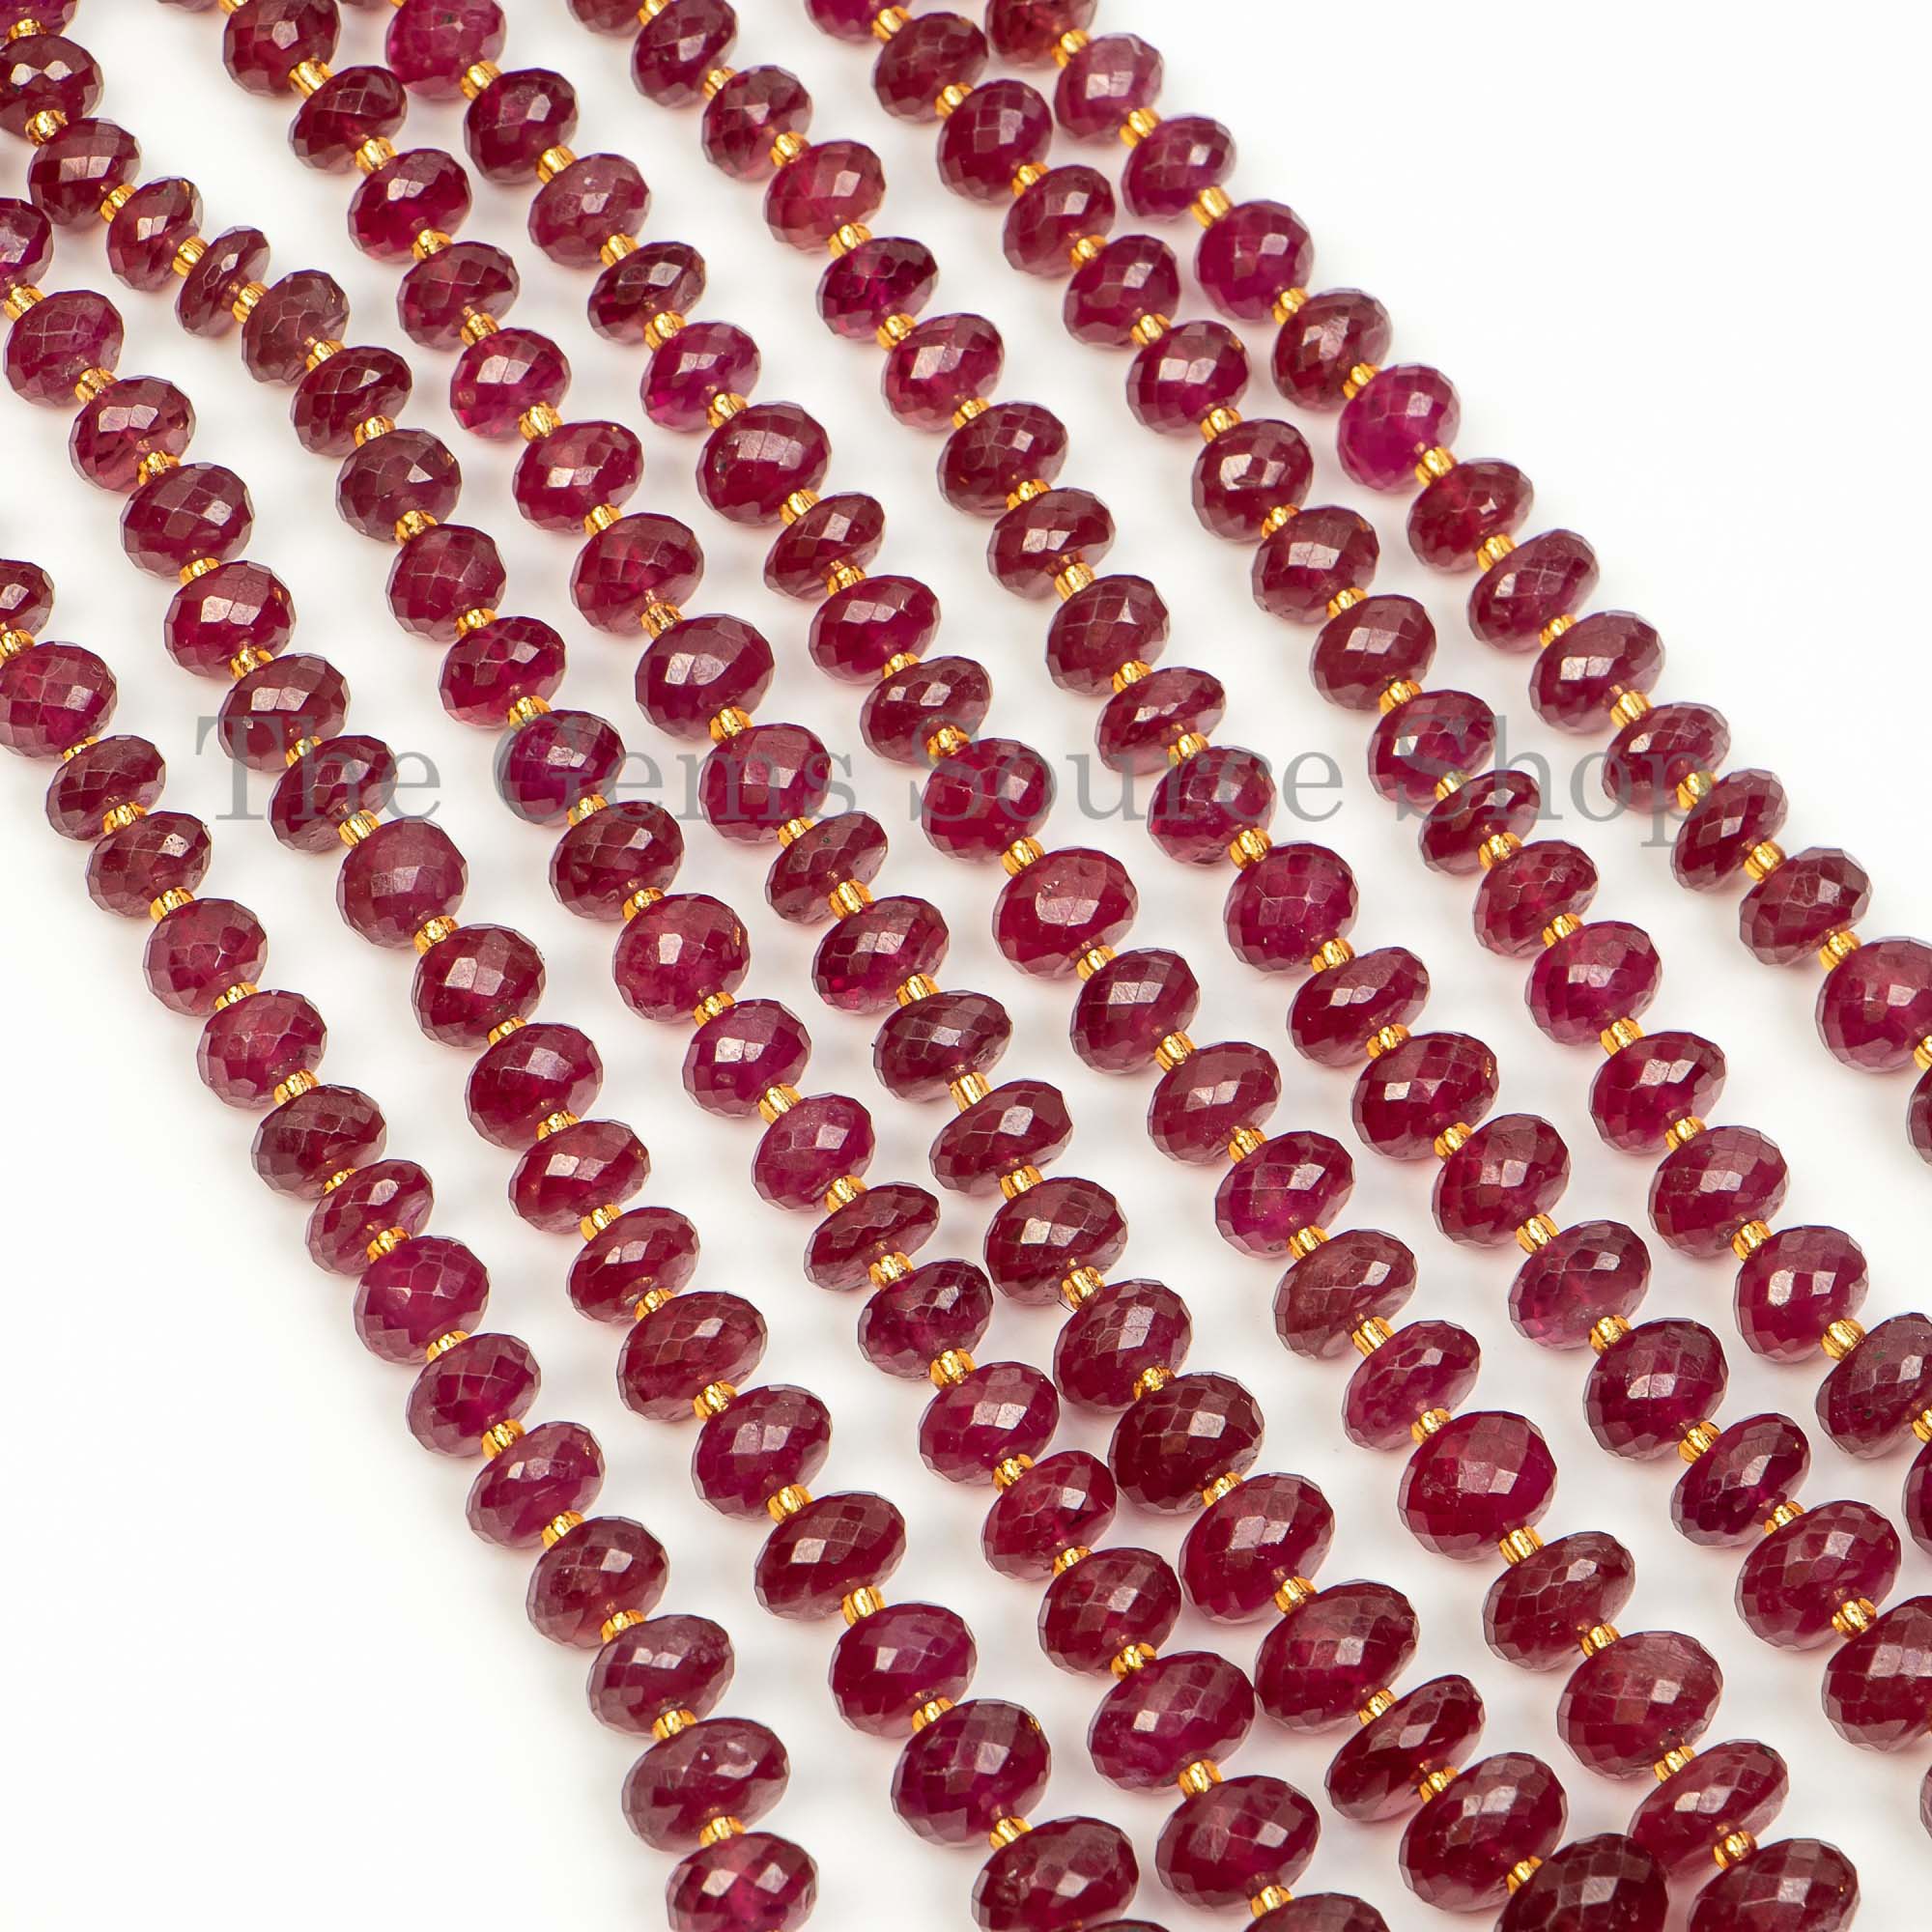 Natural Ruby Rondelle Beads, 5-9mm Ruby Beads, Ruby Rondelle Beads, Gemstone Rondelle Beads